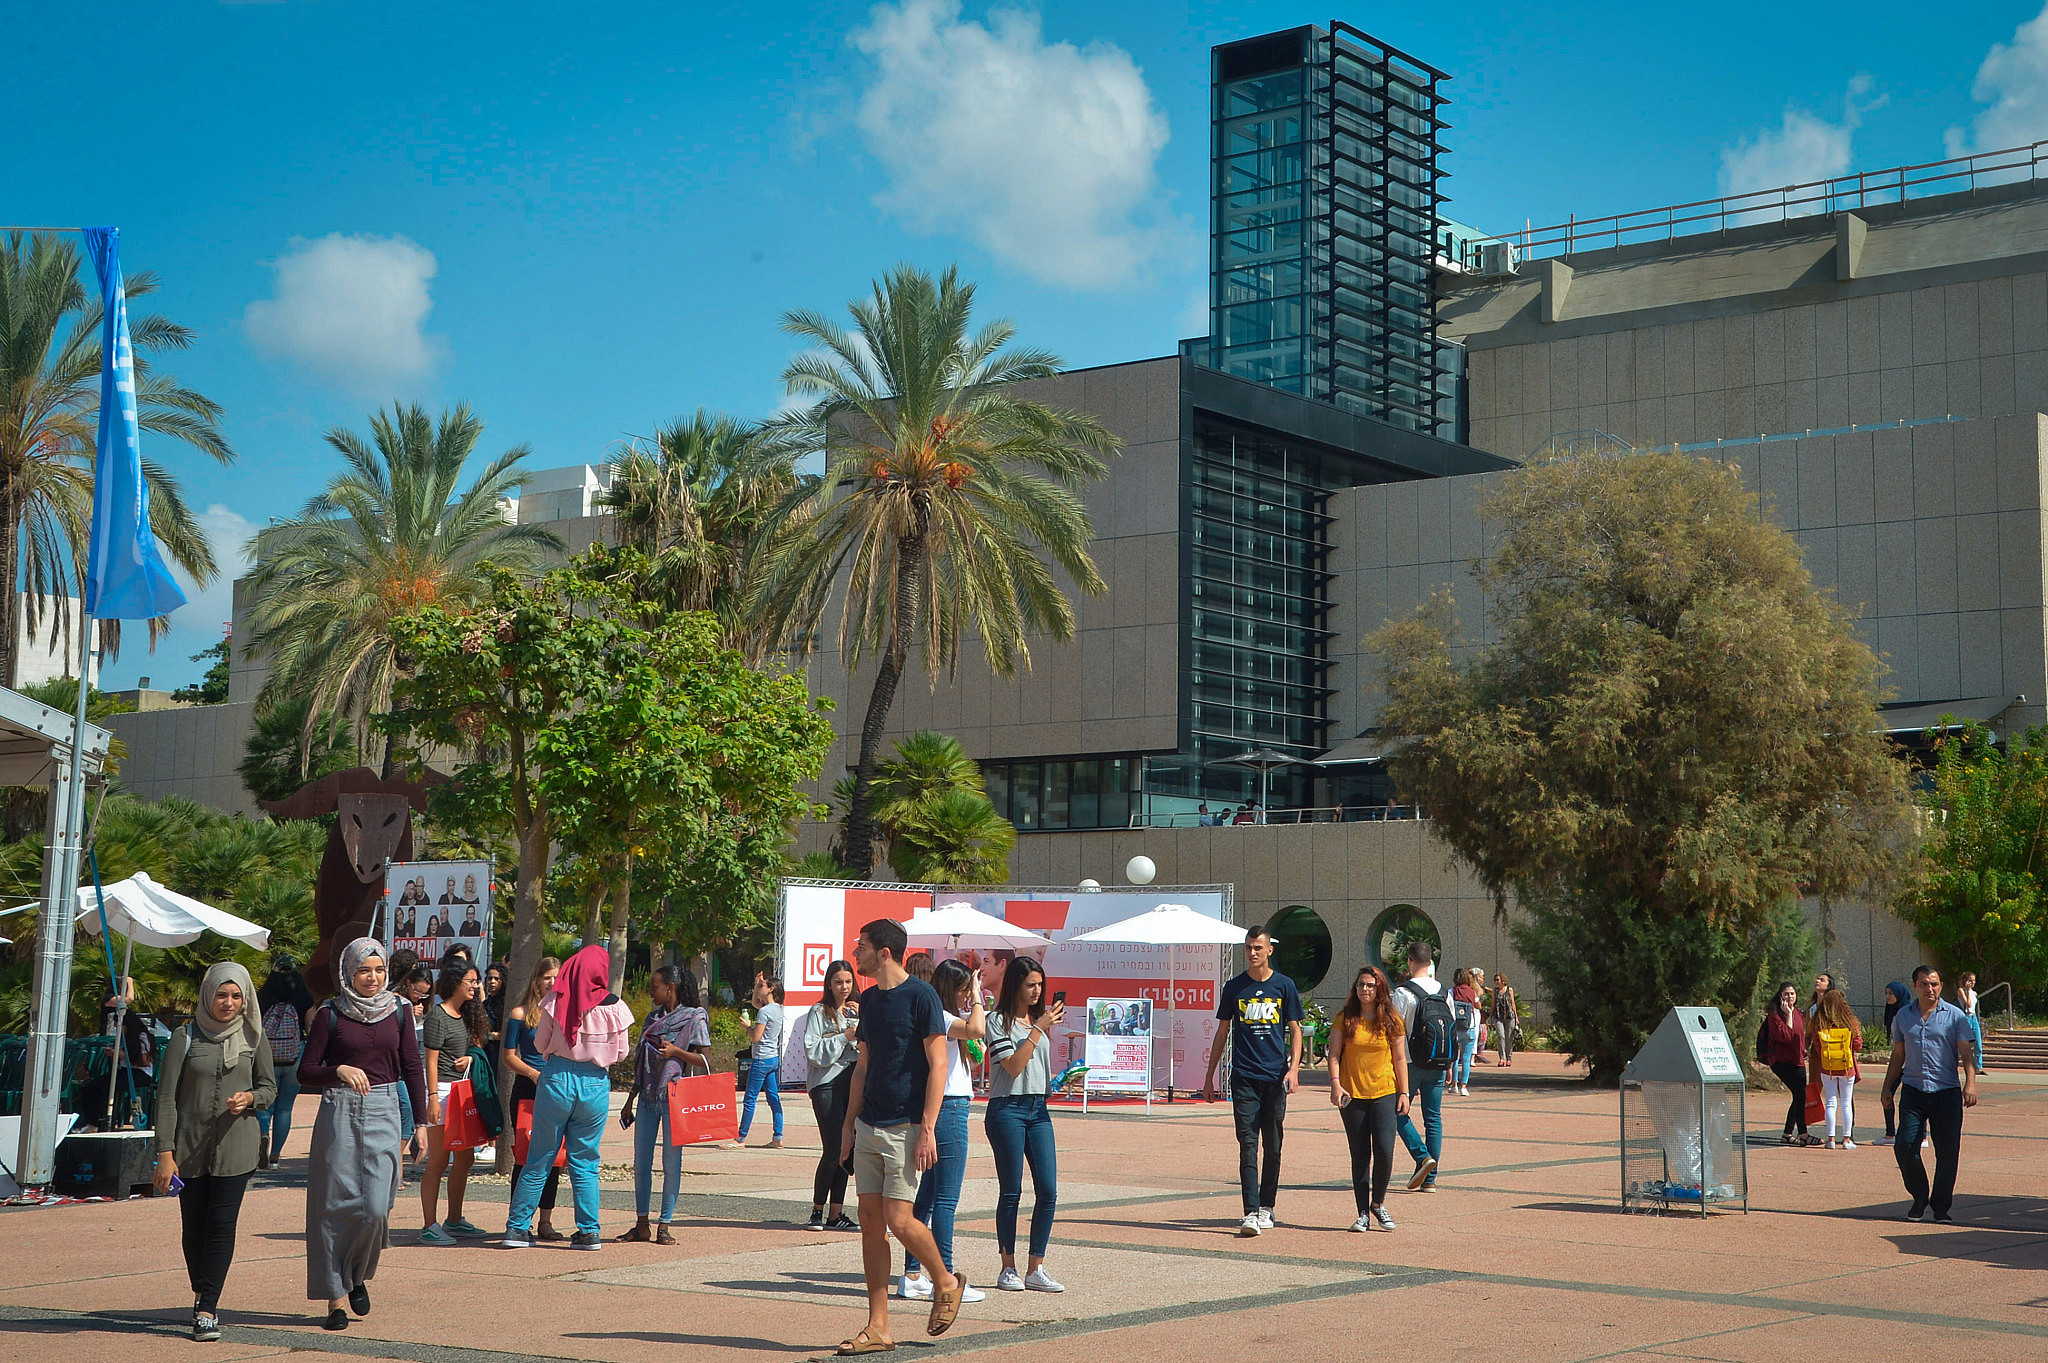 Students seen at Tel Aviv University on the first day of the new academic year, October 14, 2018. (Flash90)